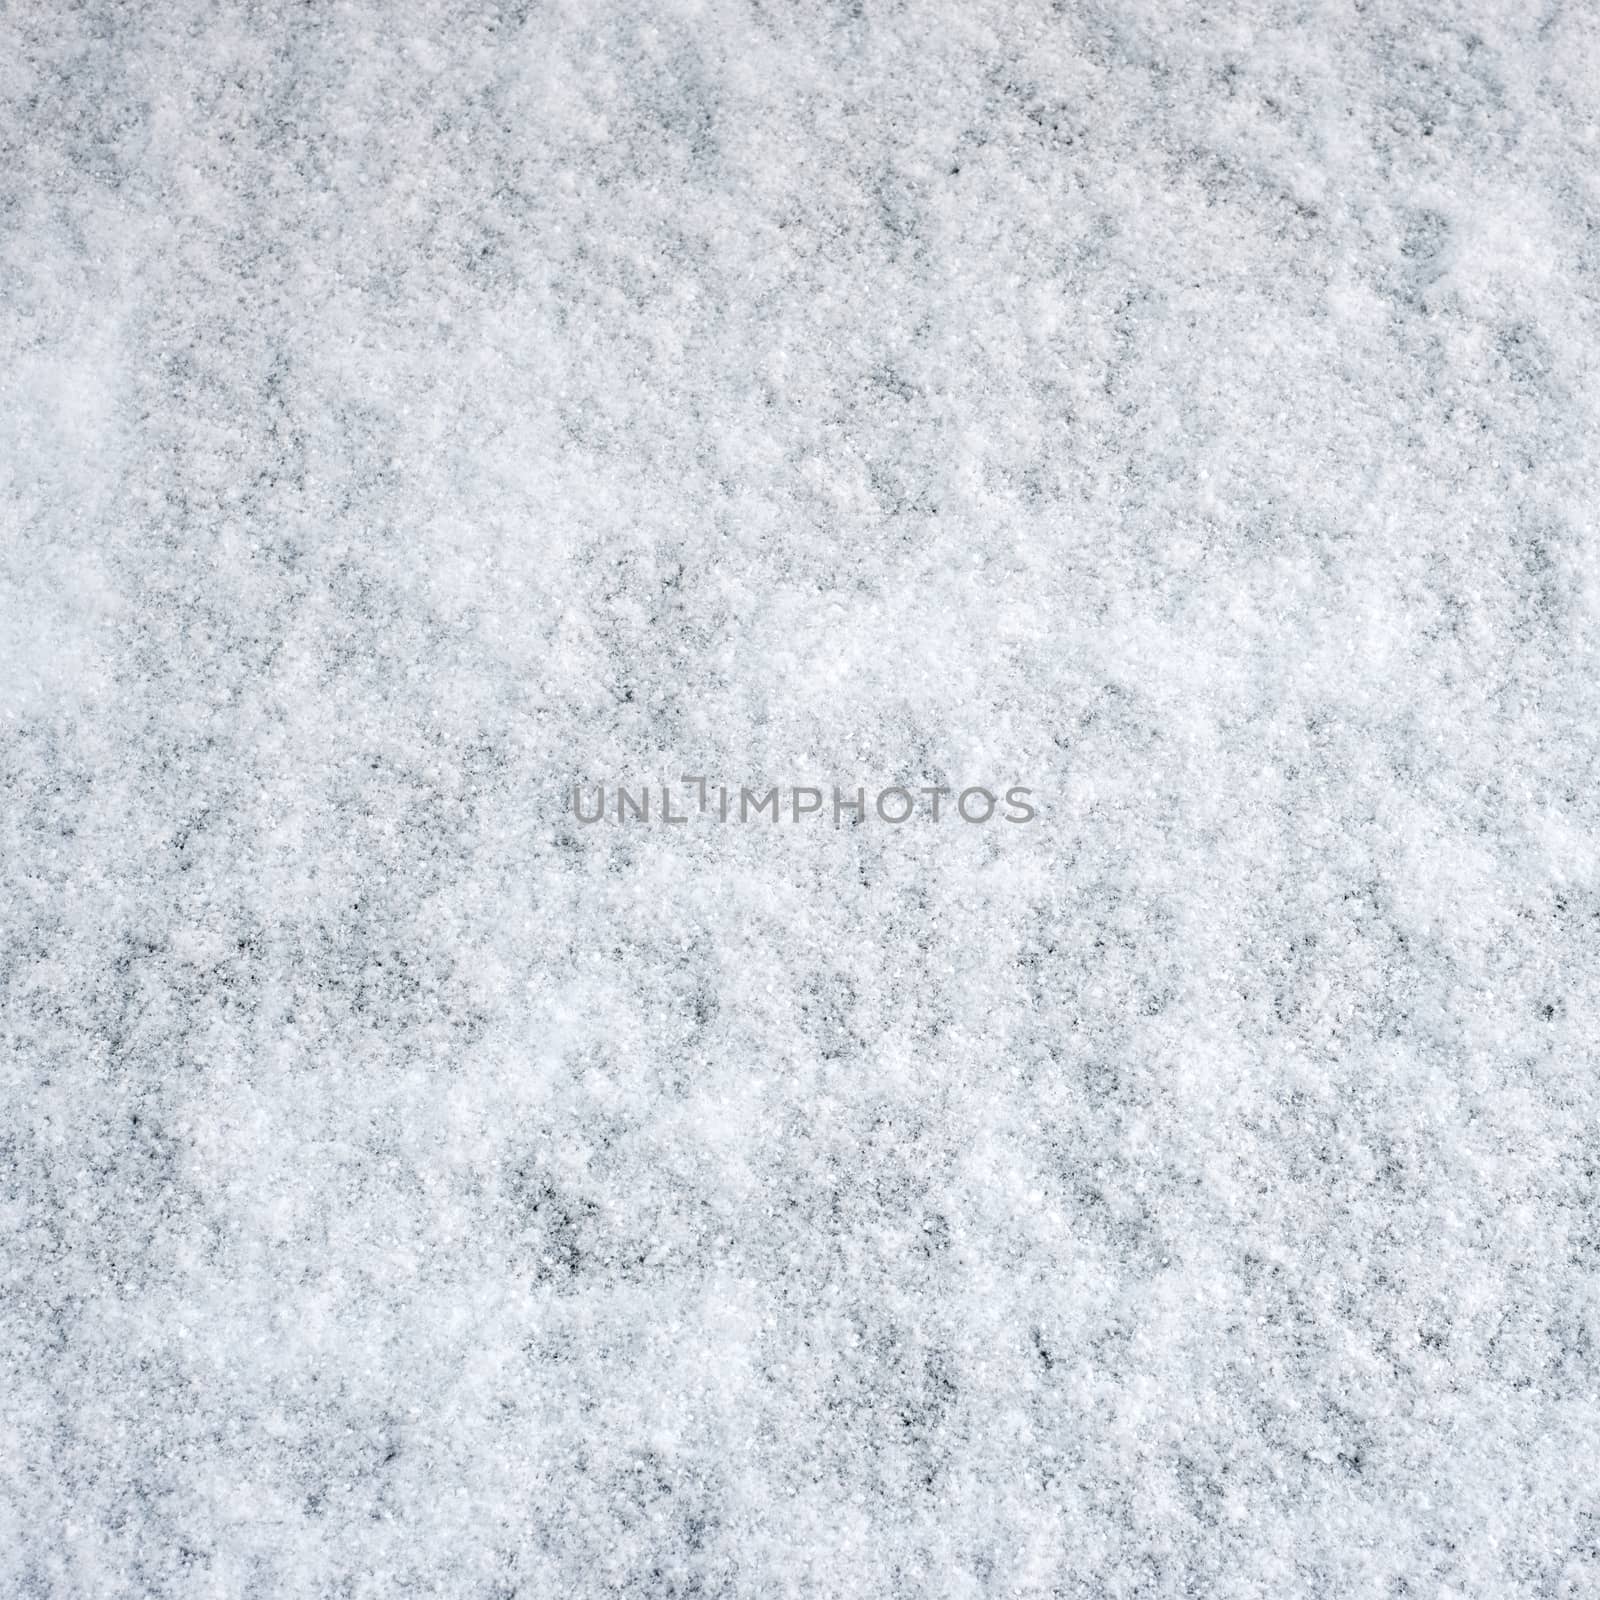 pure snow background texture, cold winter time